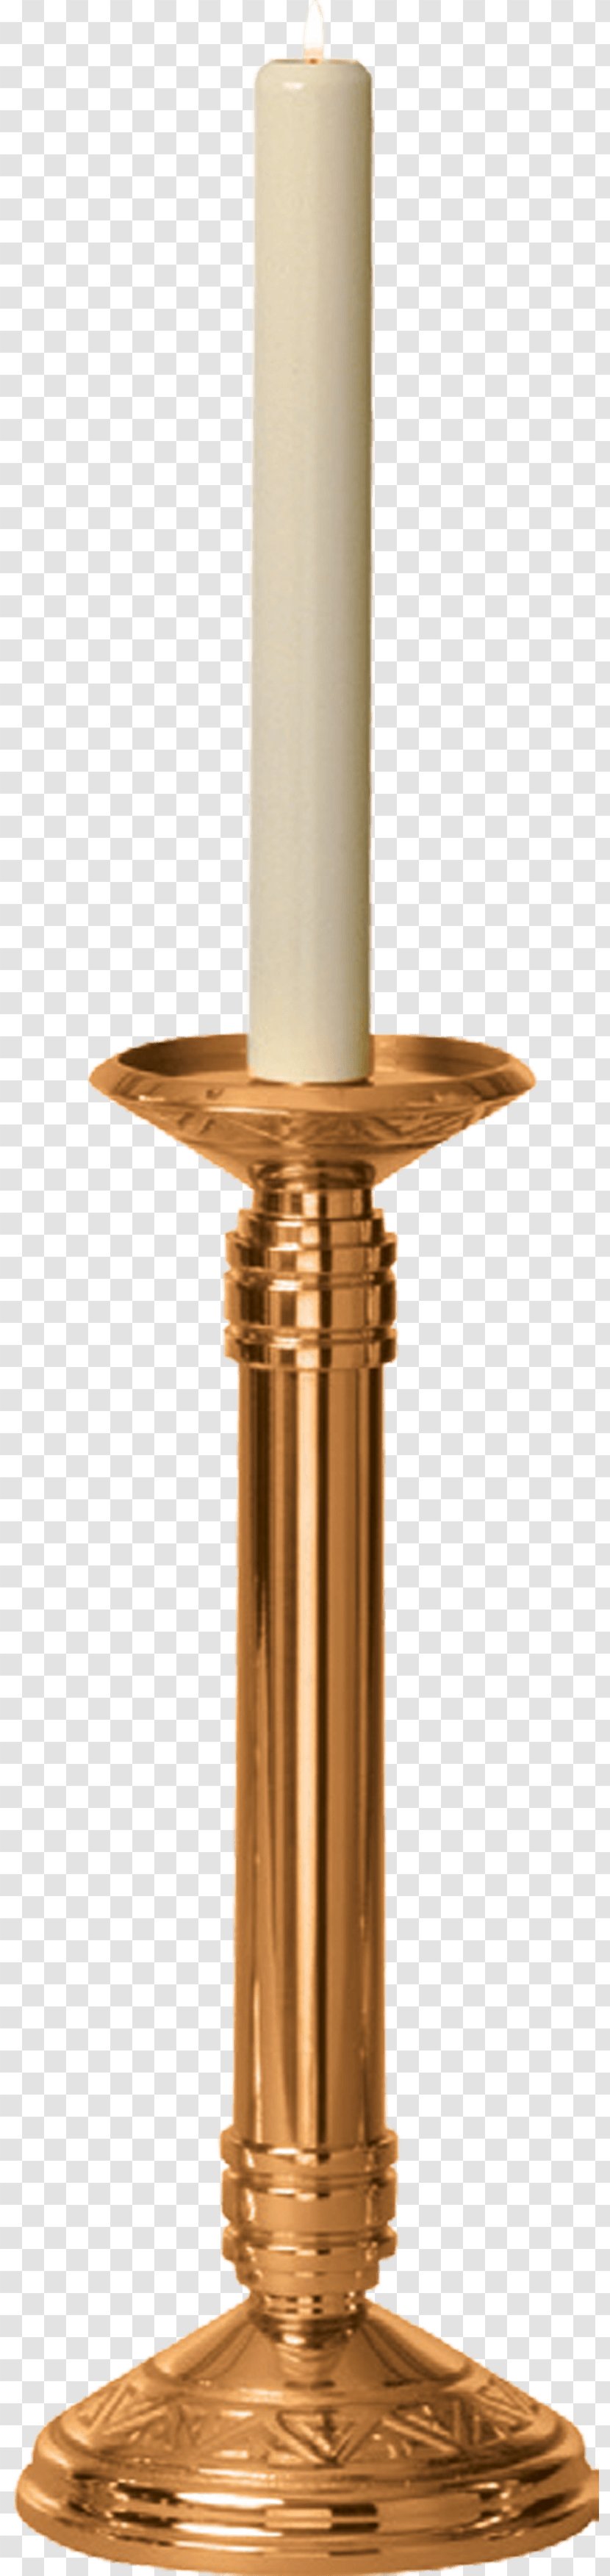 Candlestick Altar In The Catholic Church Candle - Candelabra Transparent PNG